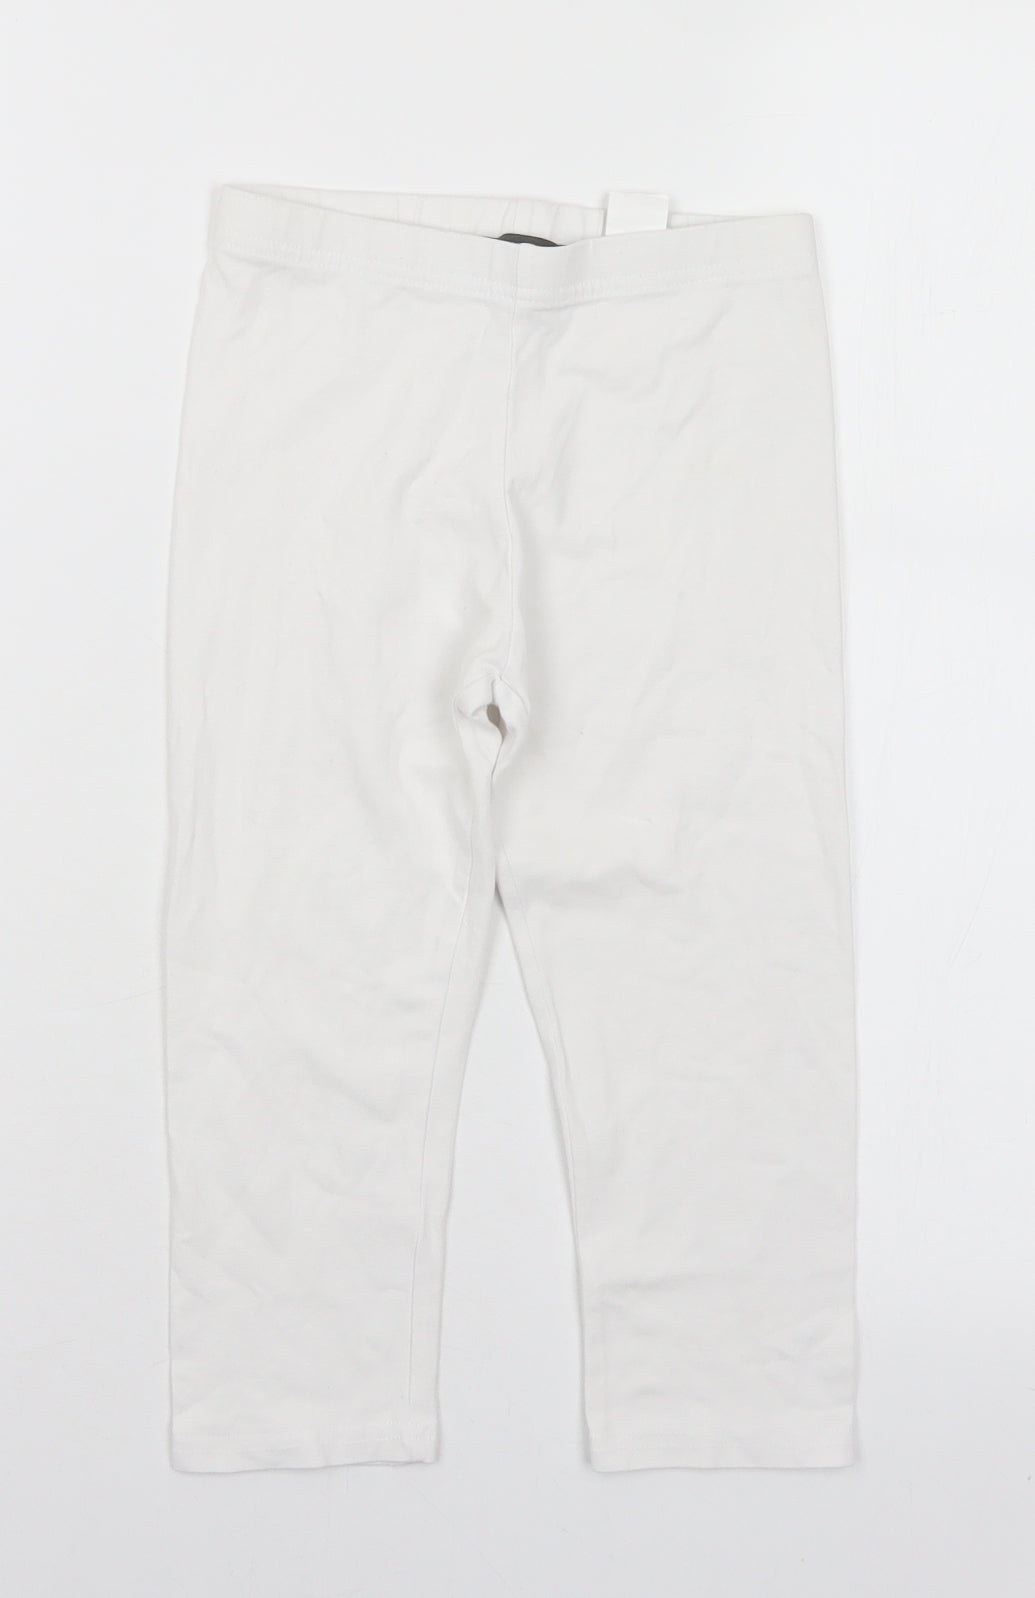 Primark Girls White  Cotton Pedal Pusher Trousers Size 8-9 Years  Regular